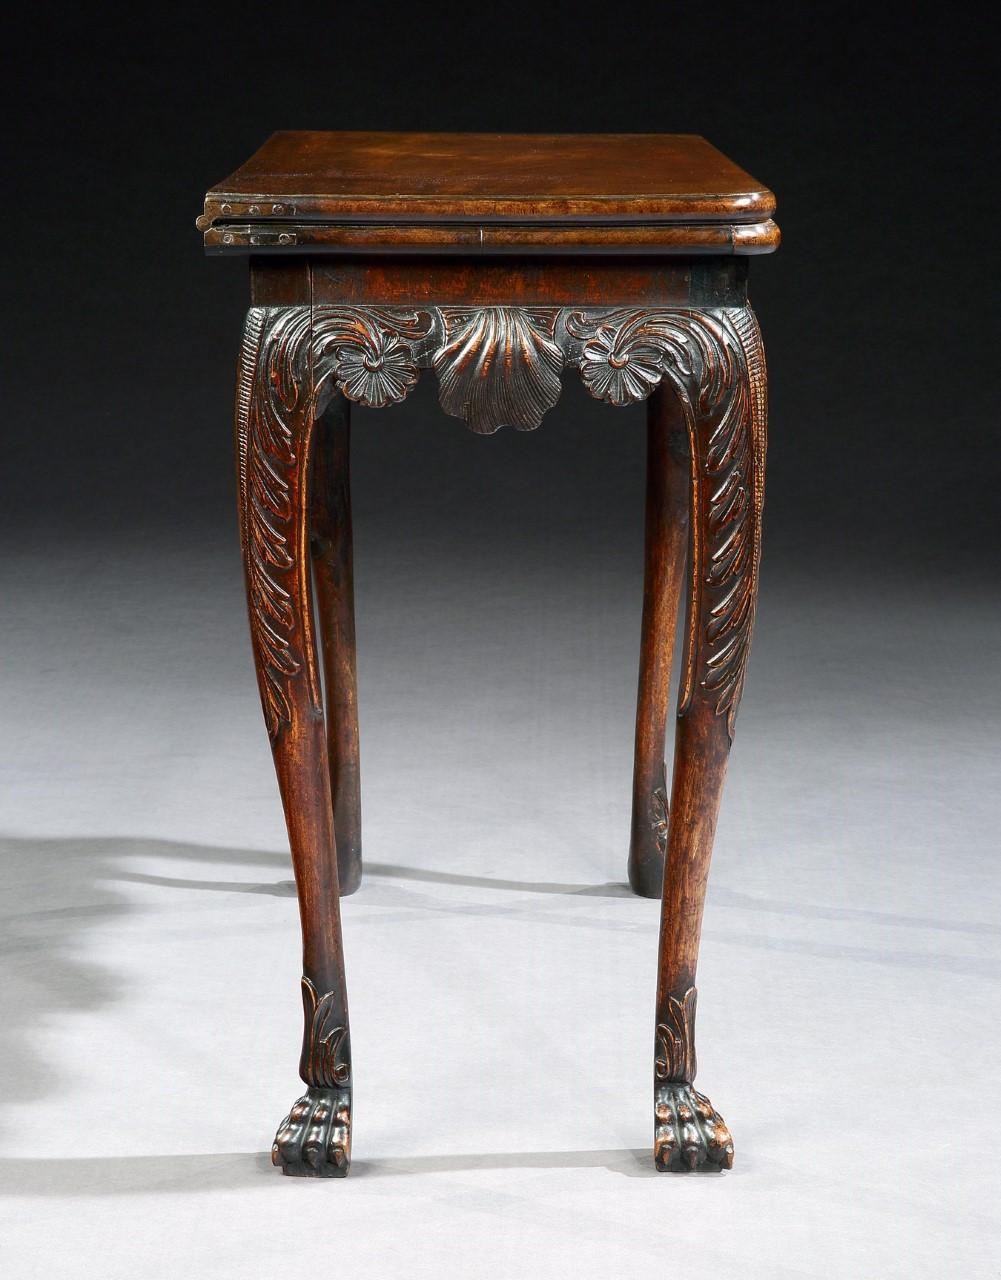 A superbly carved 18th century Irish walnut games table. The rectangular turnover top above a well carved frieze, with a central scallop shell, flanked by flowing acanthus, resting on acanthus carved cabriole legs with bold paw feet.